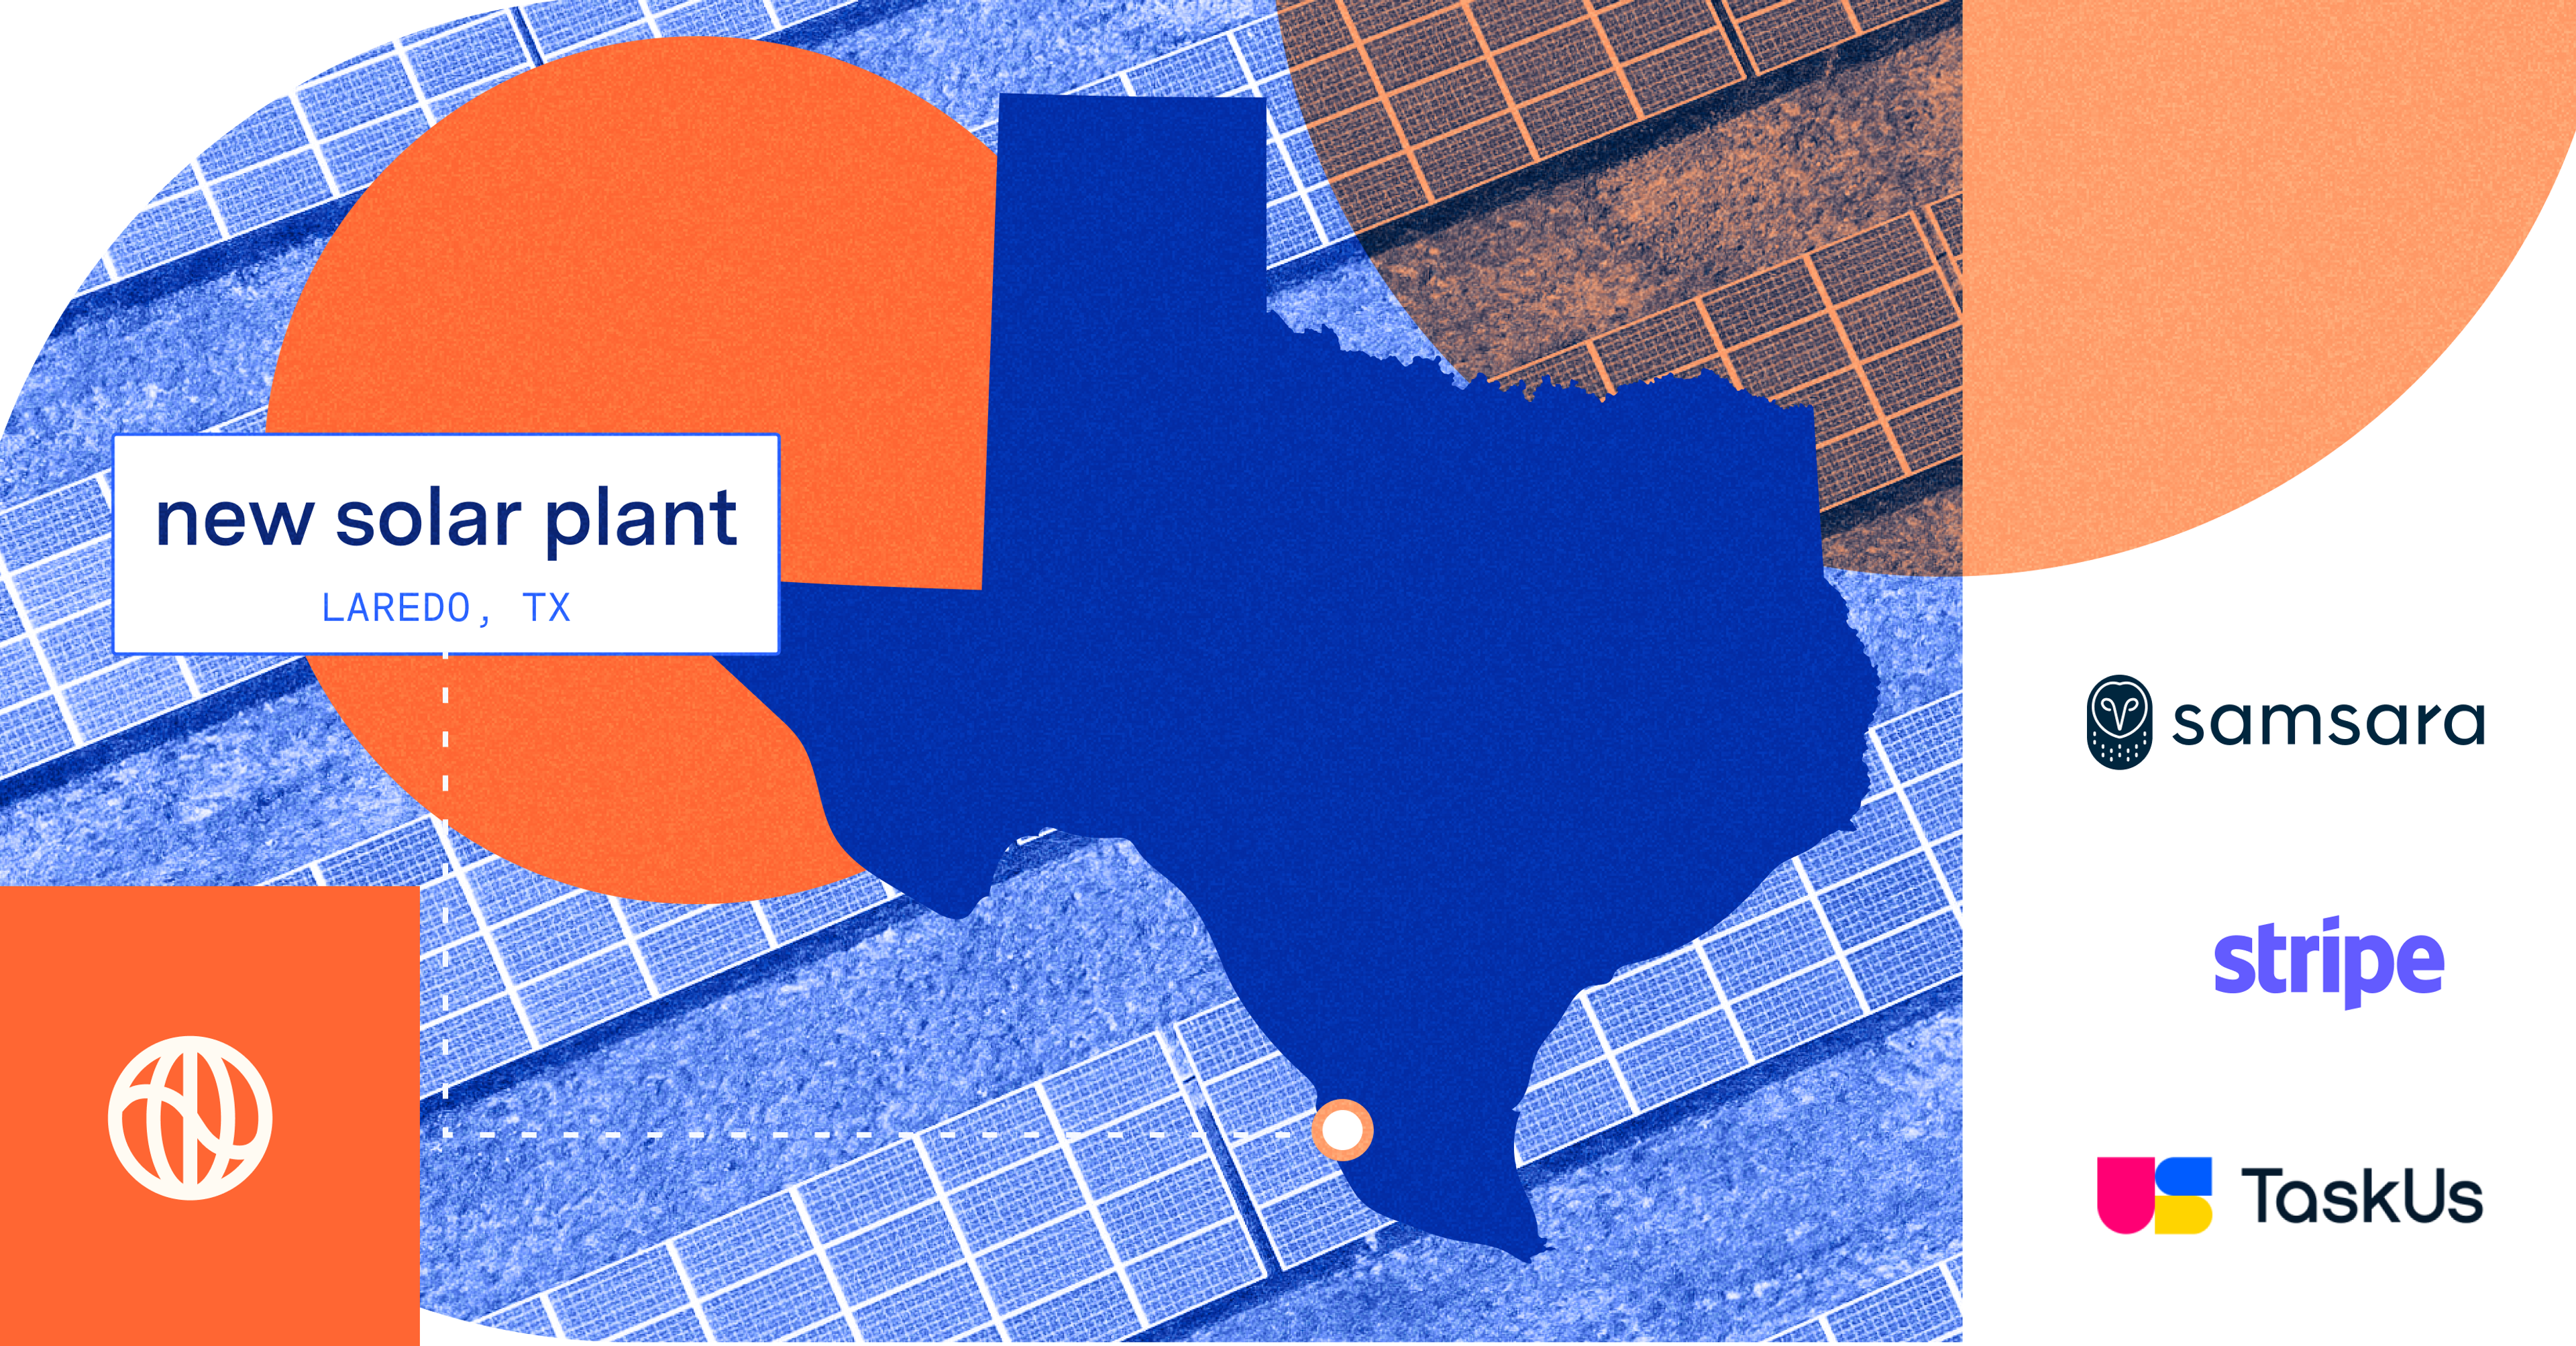 map of Texas with solar plant placed in Laredo, TX with the logos of Watershed, Samsara, Stripe and TaskUs